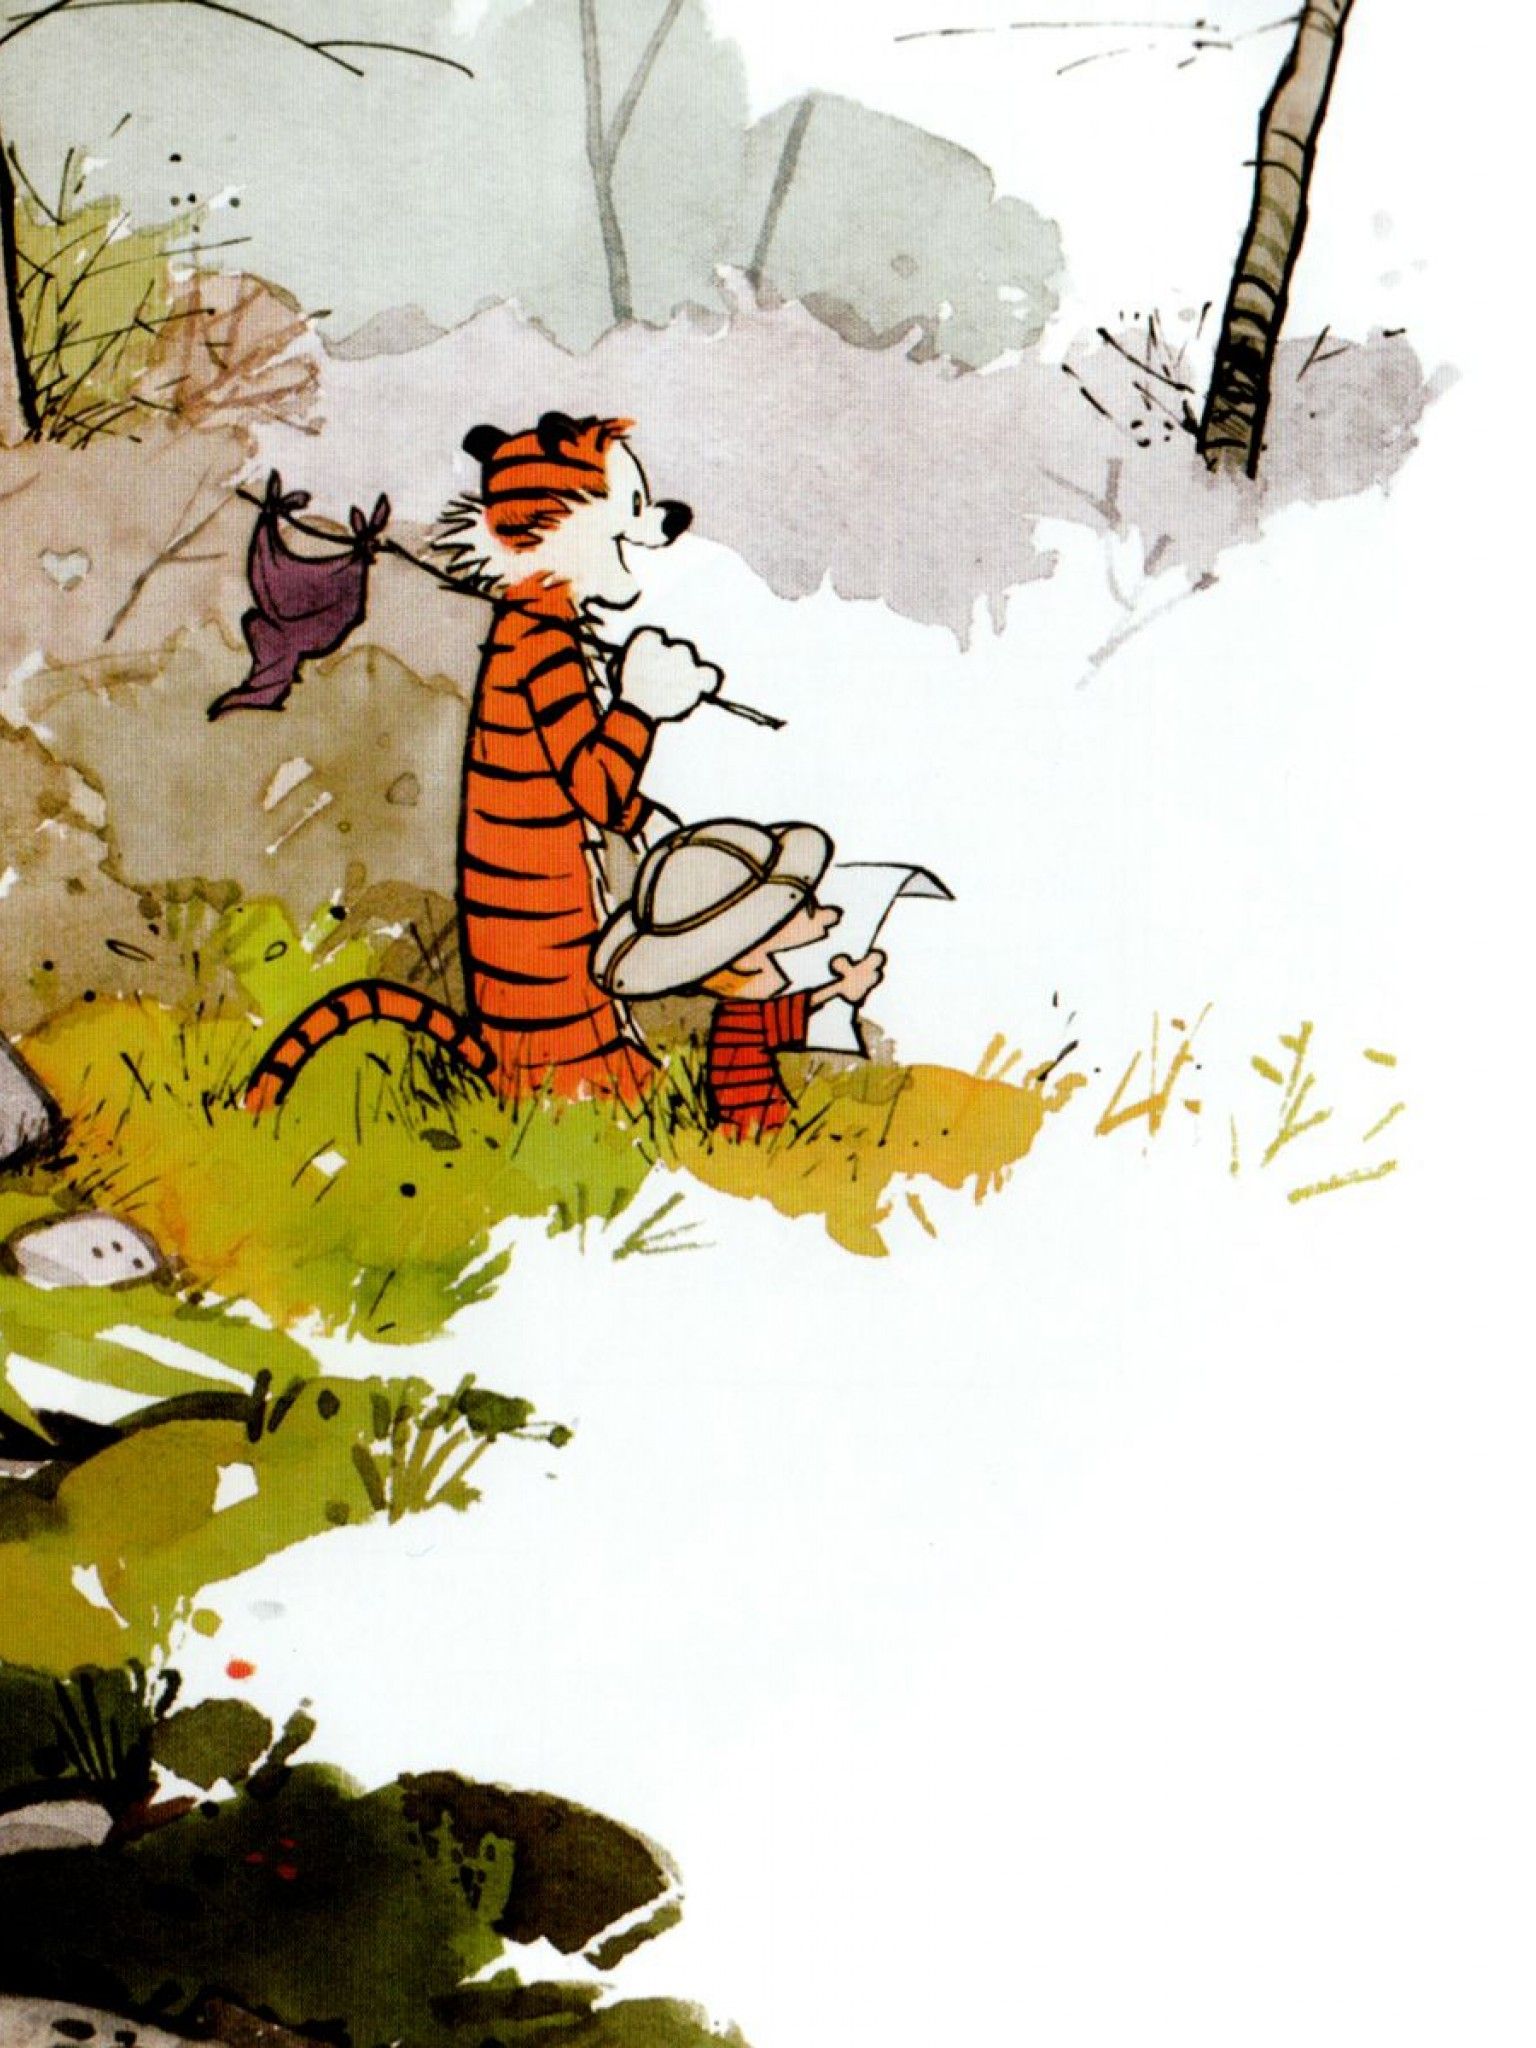 Thought Id share my Calvin  Hobbes iPhone wallpaper  riphone